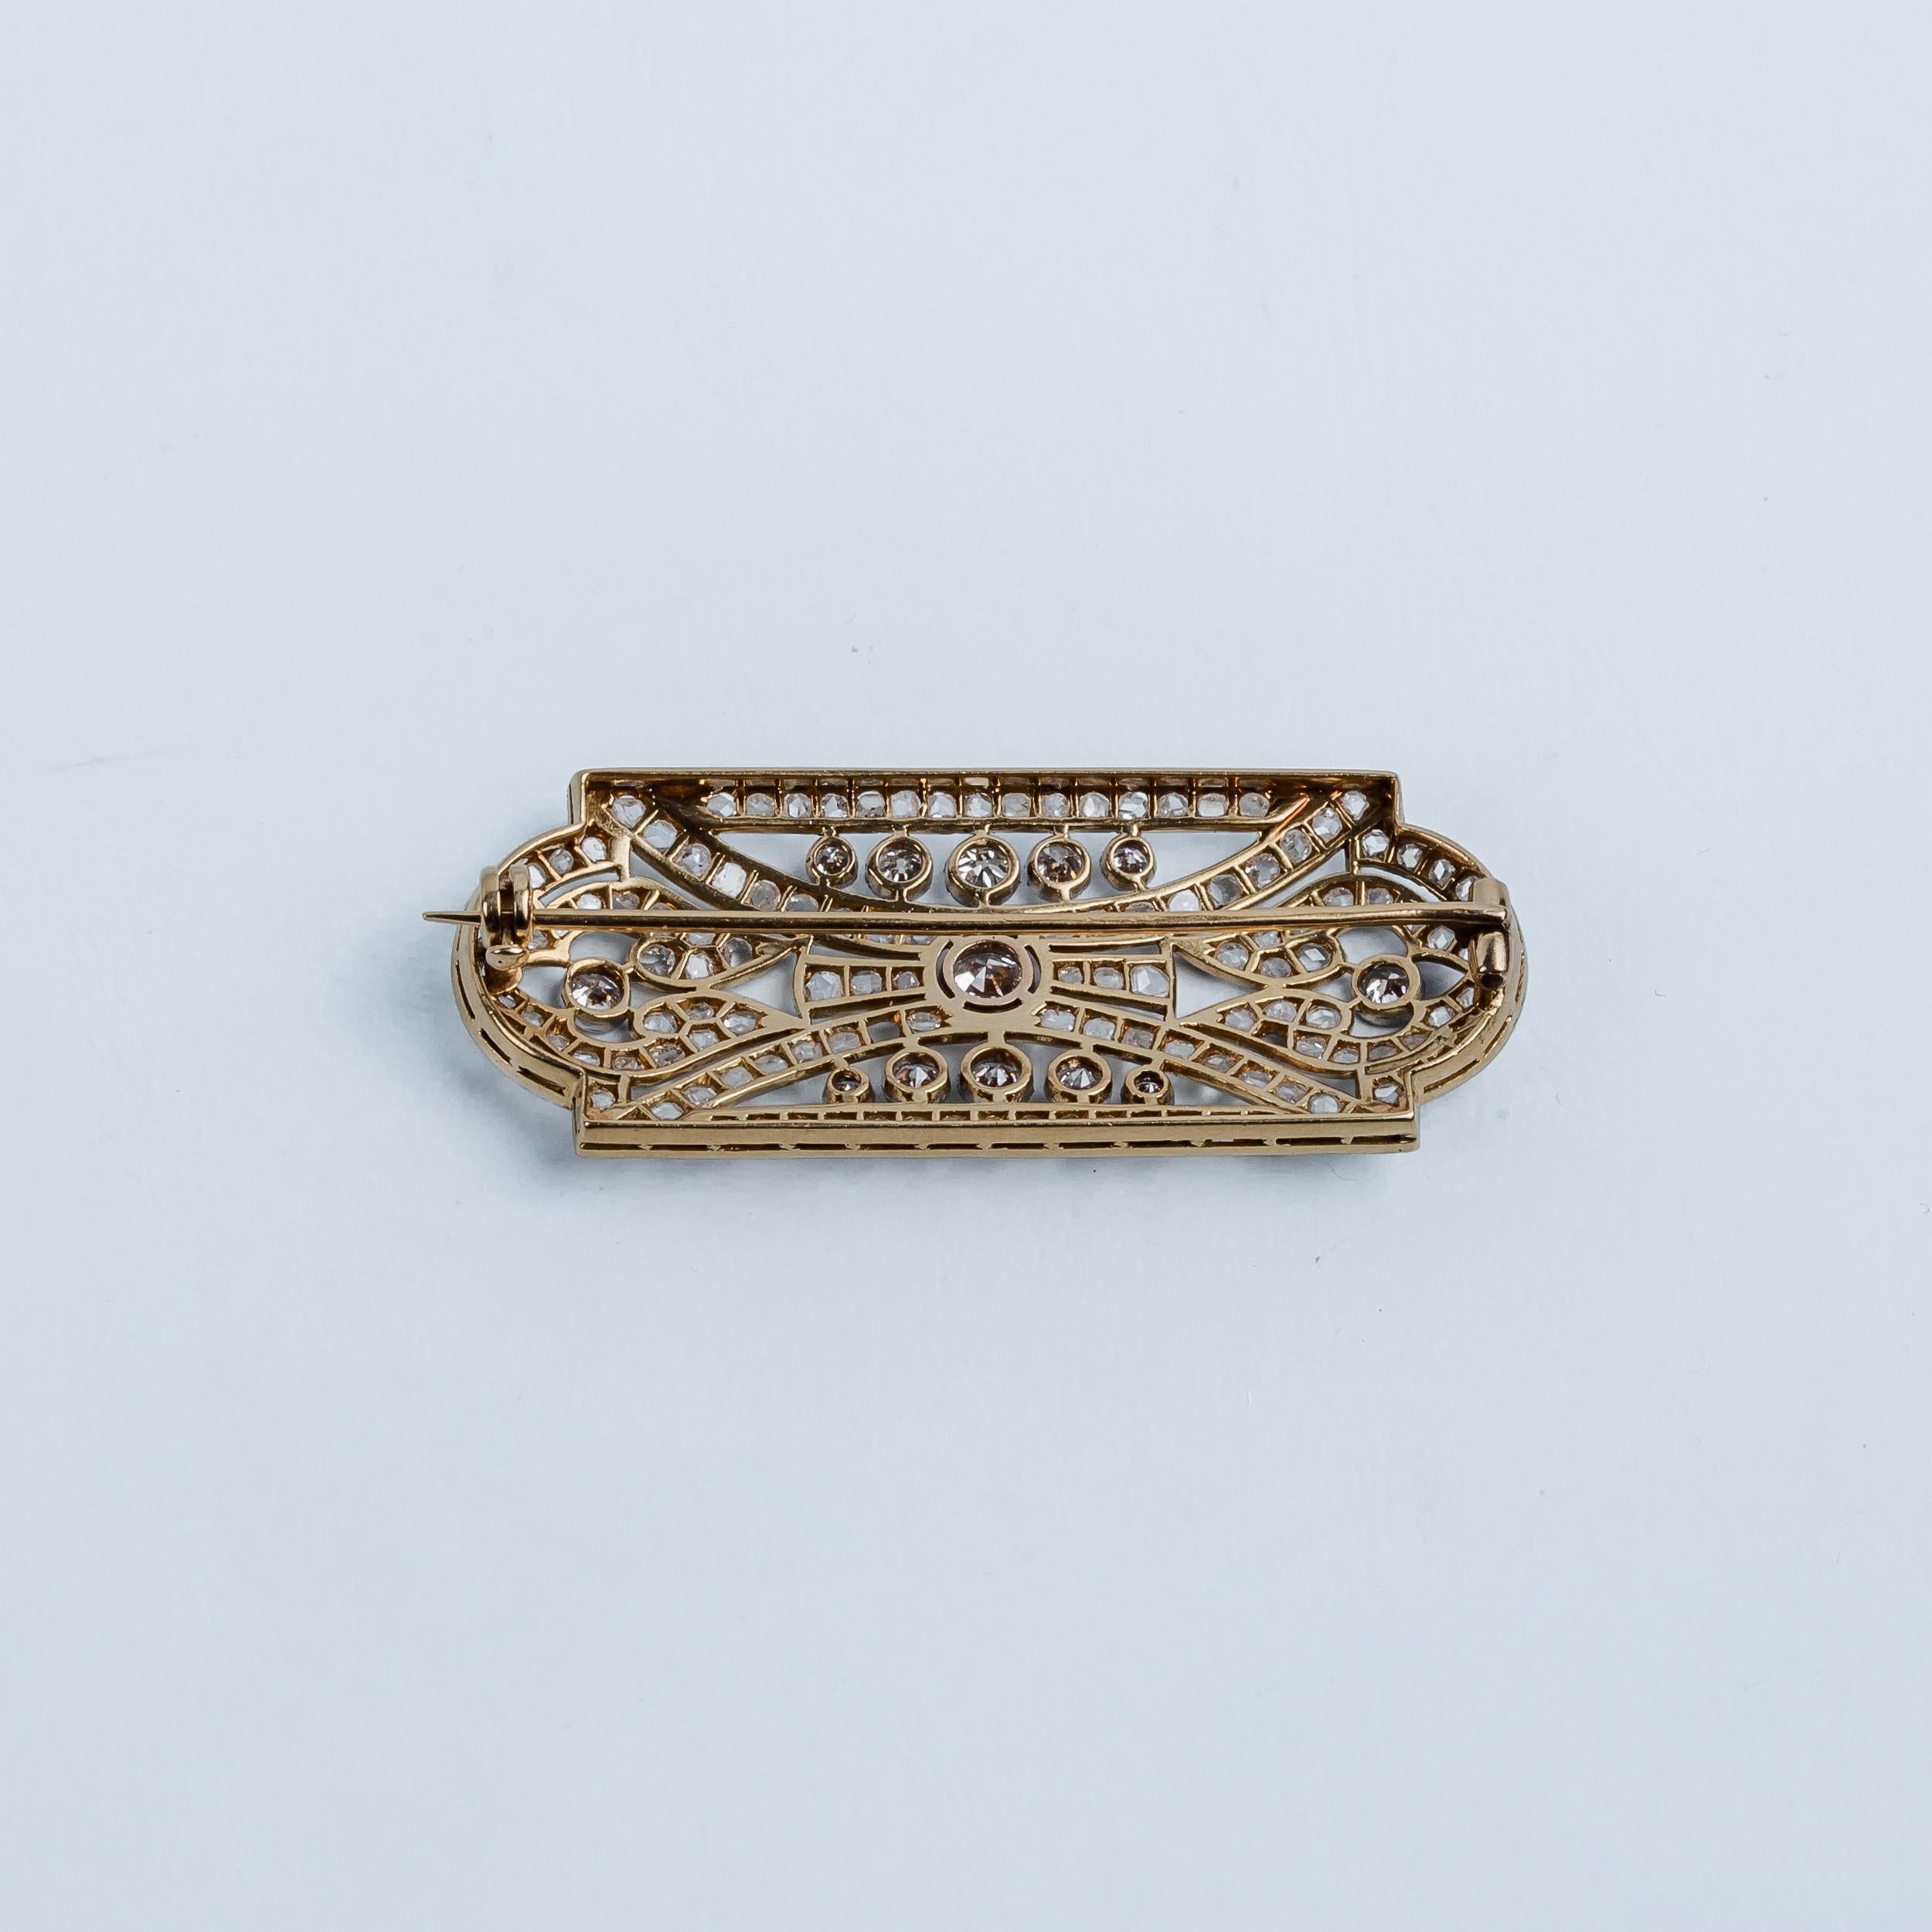 Art-Nouveau pin brooch in rose gold with knurled platinum setting and a clean central diamond. All the bands are knurled platinum full of diamonds.

MATERIALS
◘ Weight 10.2 grams 
◘ Size 21x51.5cm / 8.26x20.27inch. 
◘ Central Diamond aprox 0.25ct
◘